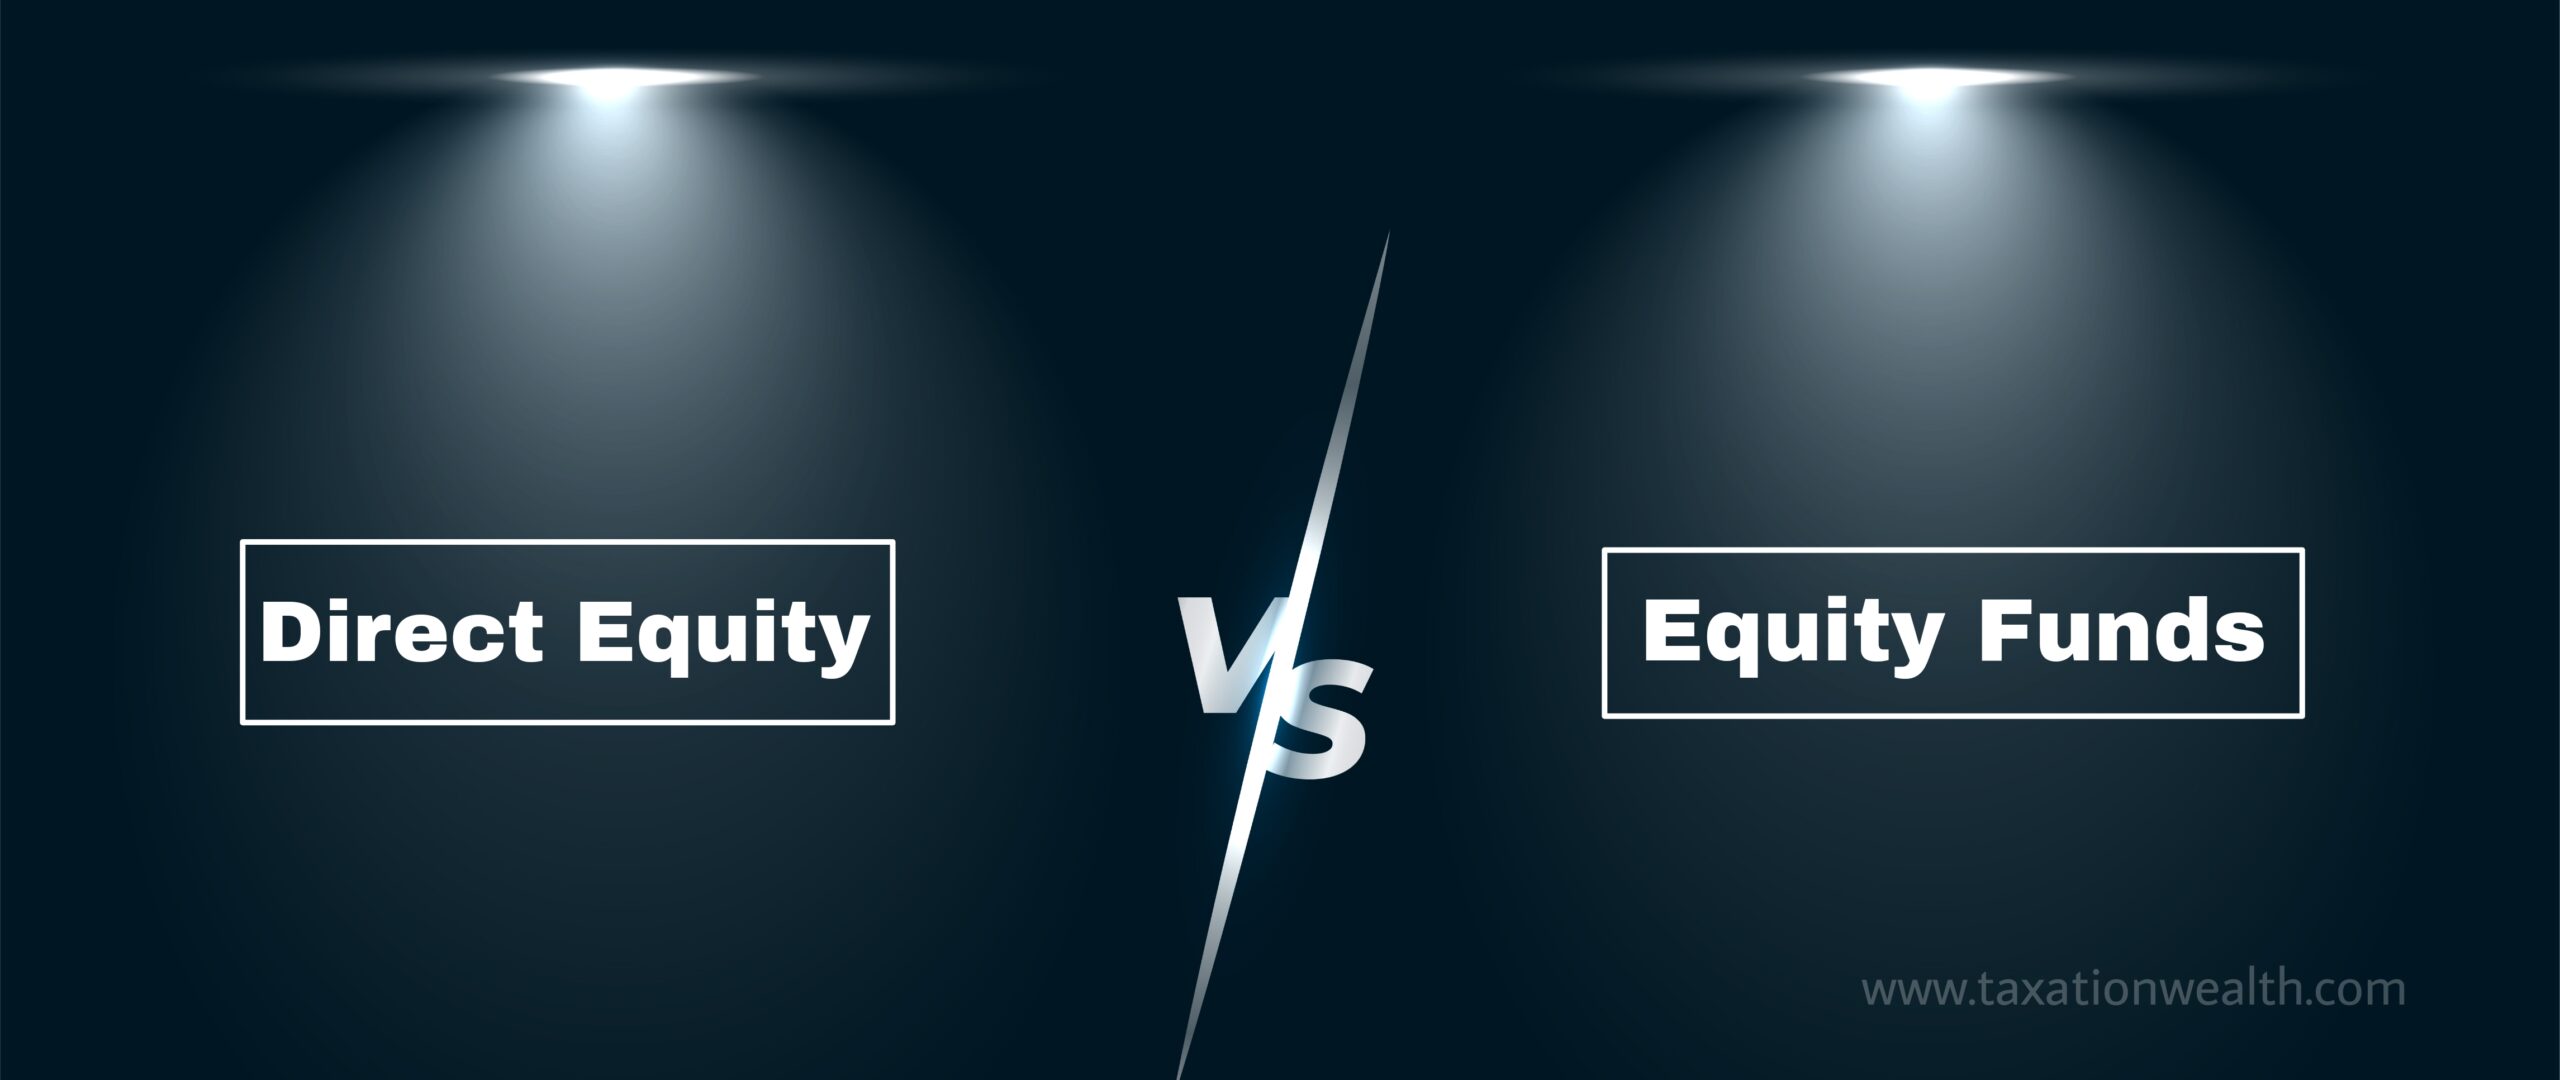 Direct equity Vs Equity Funds - Taxationwealth